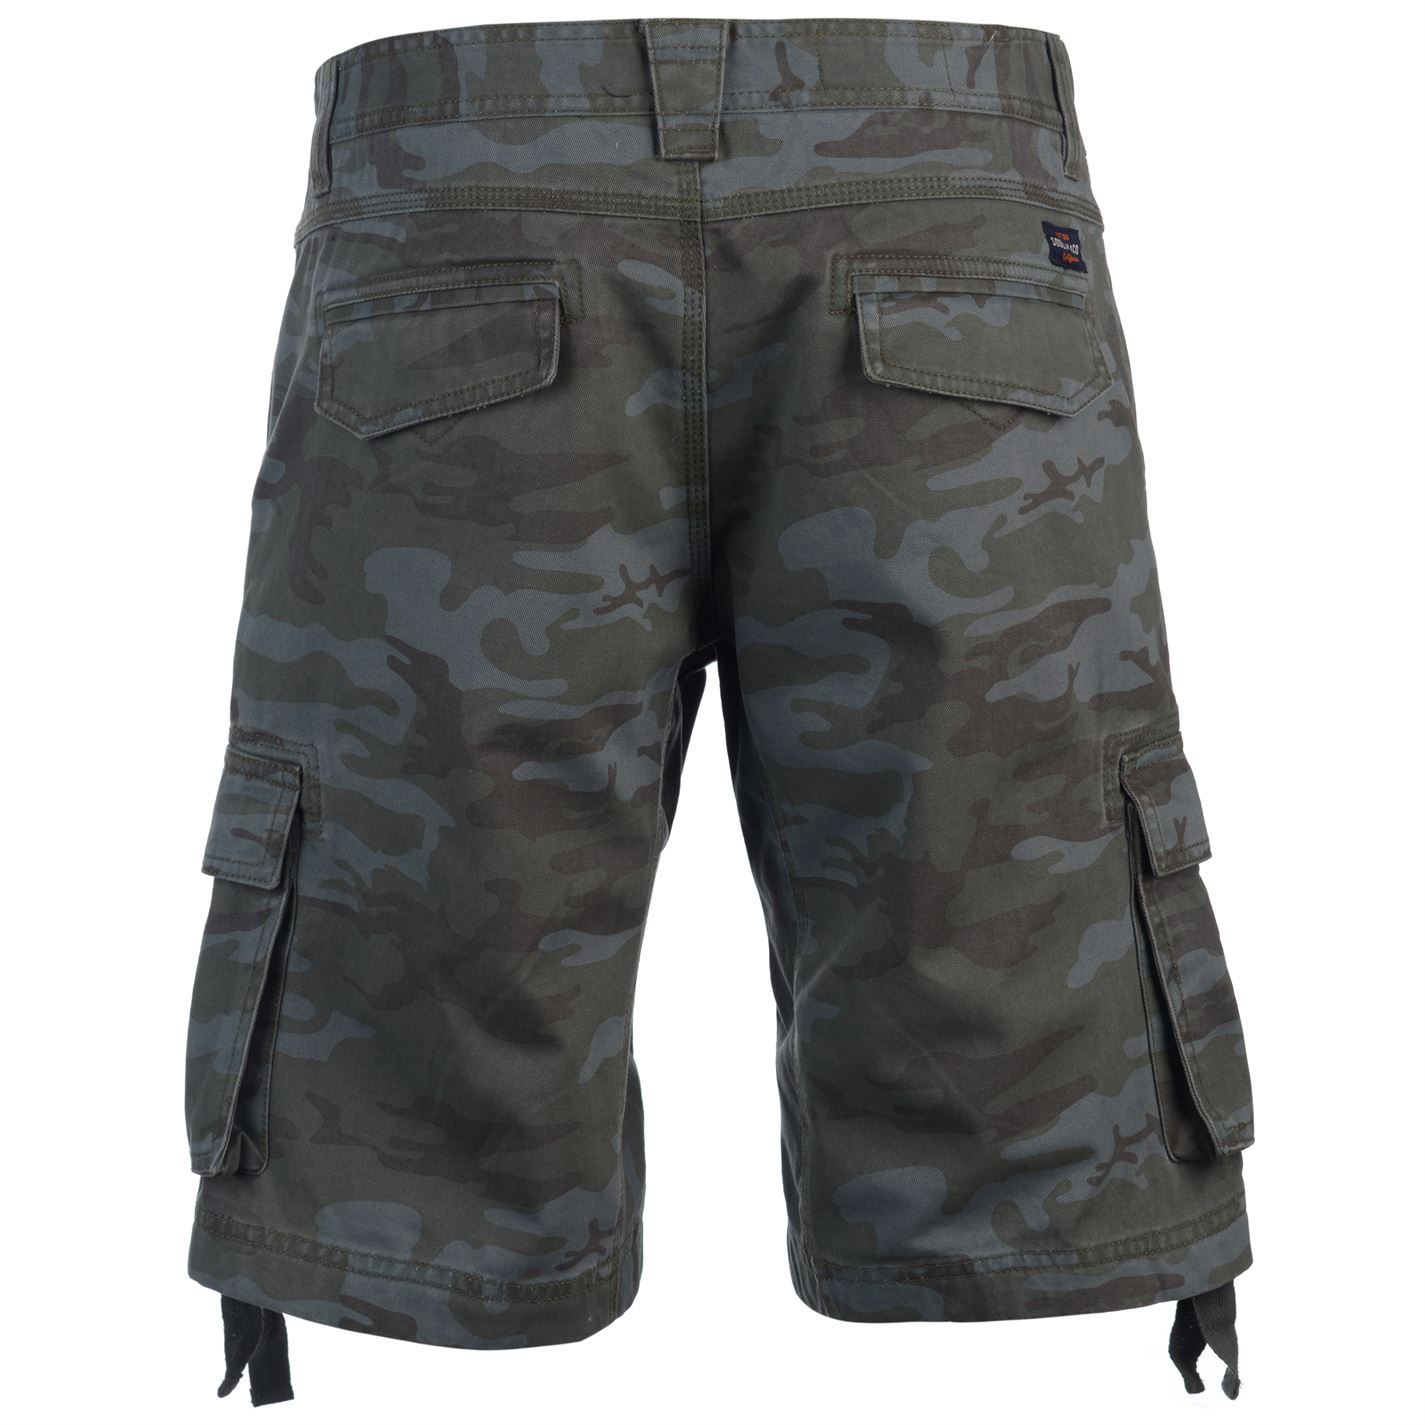 SoulCal Utility Shorts Mens Gents Cargo Pants Trousers Bottoms | eBay